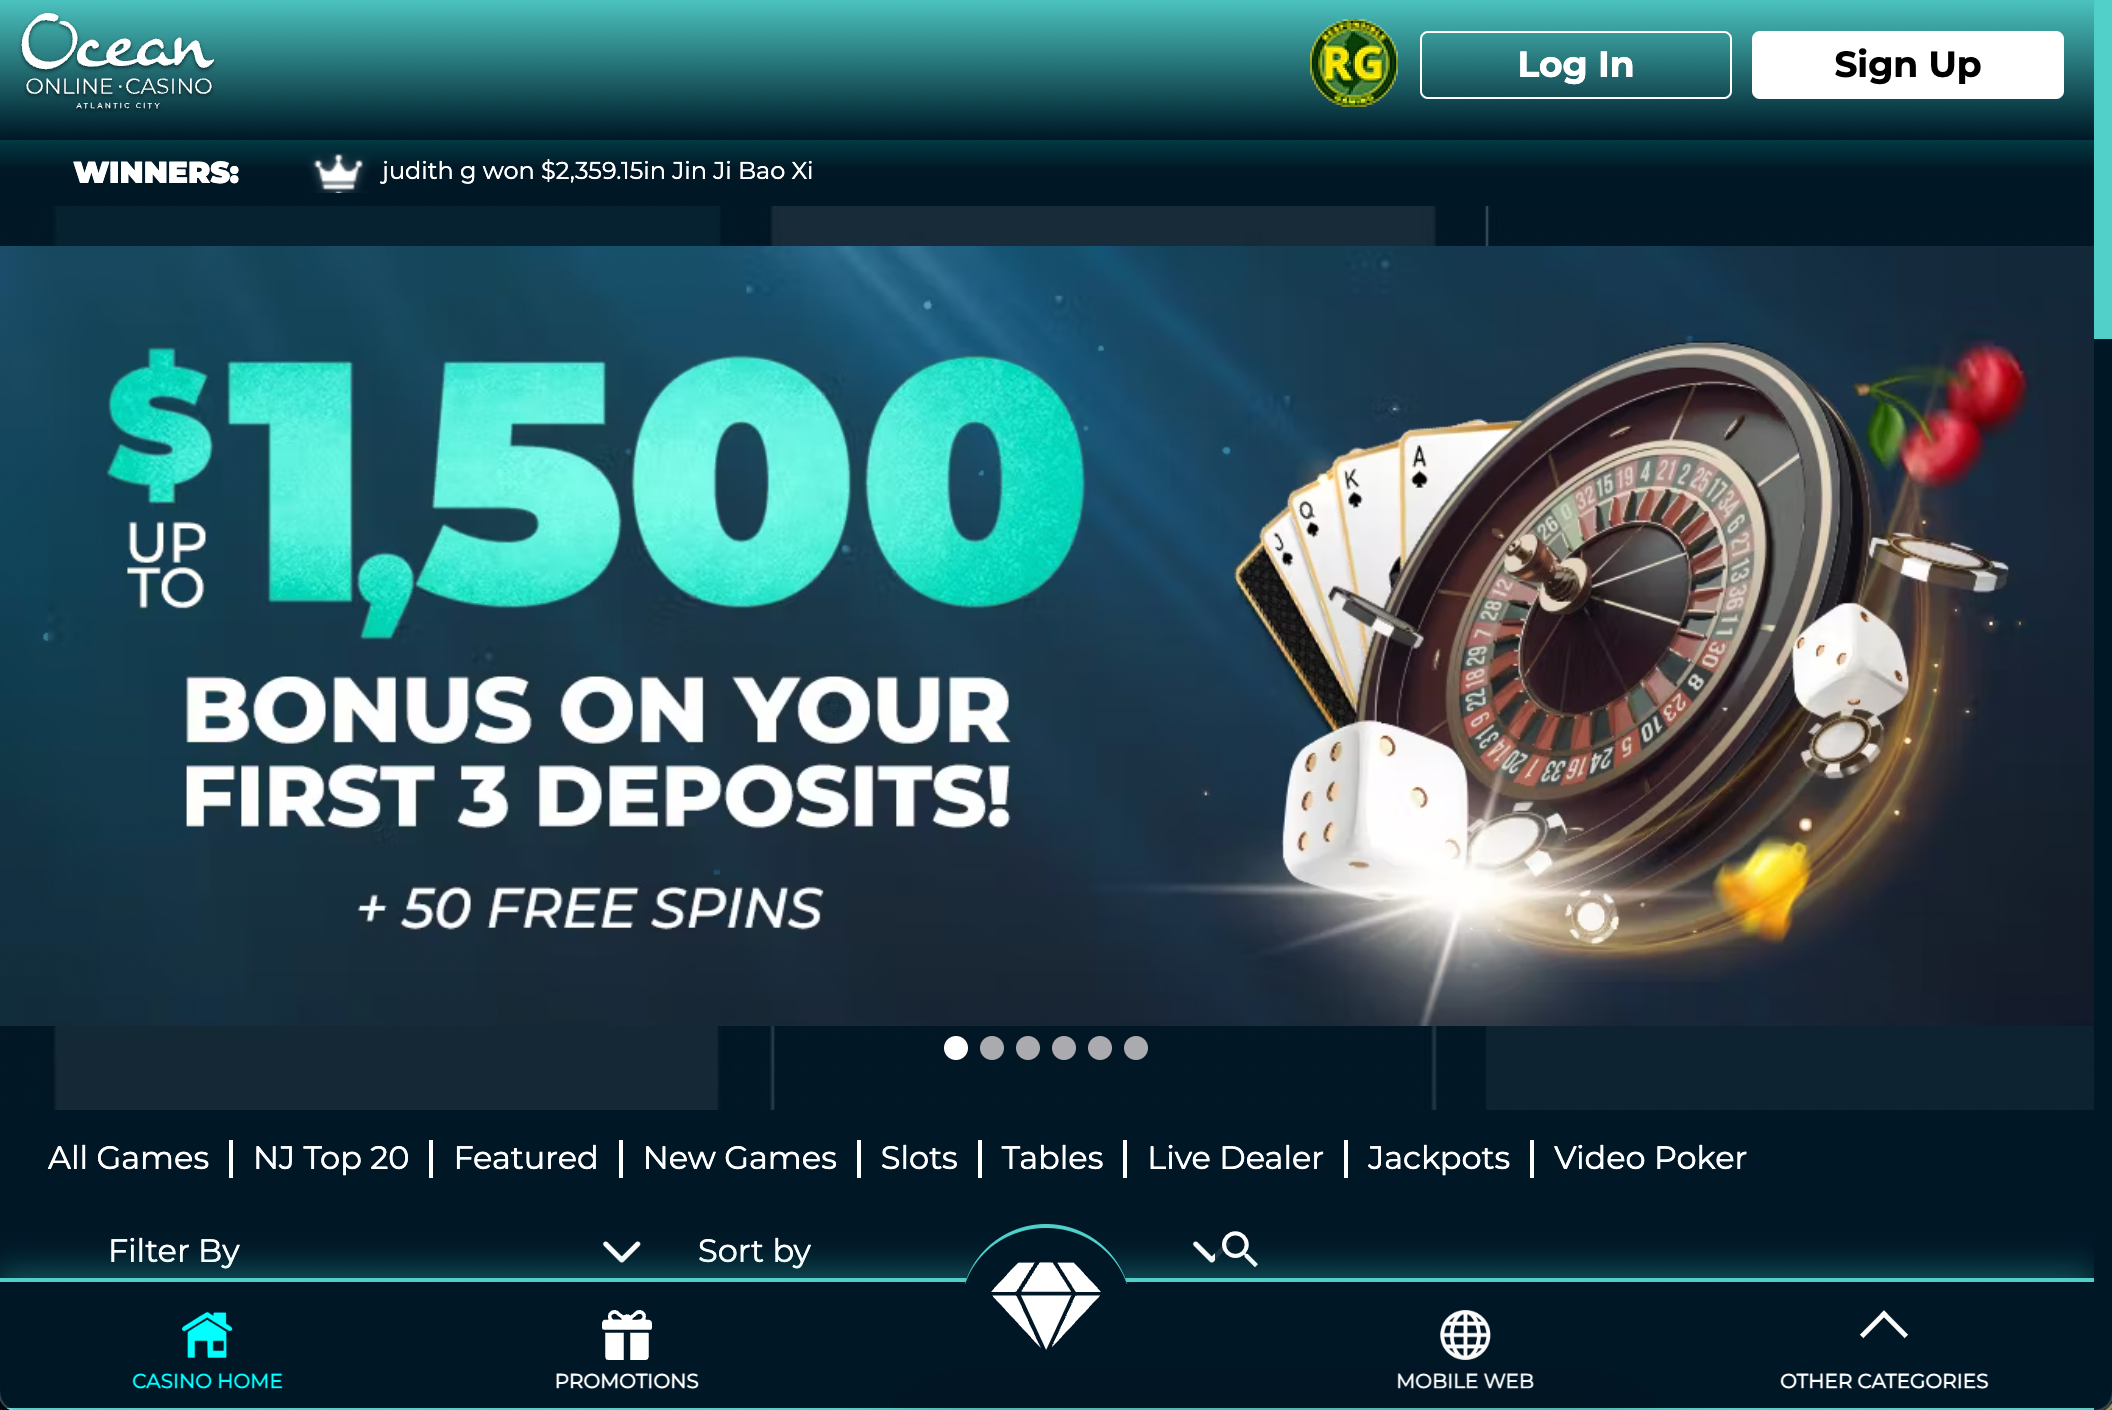 online casino Services - How To Do It Right